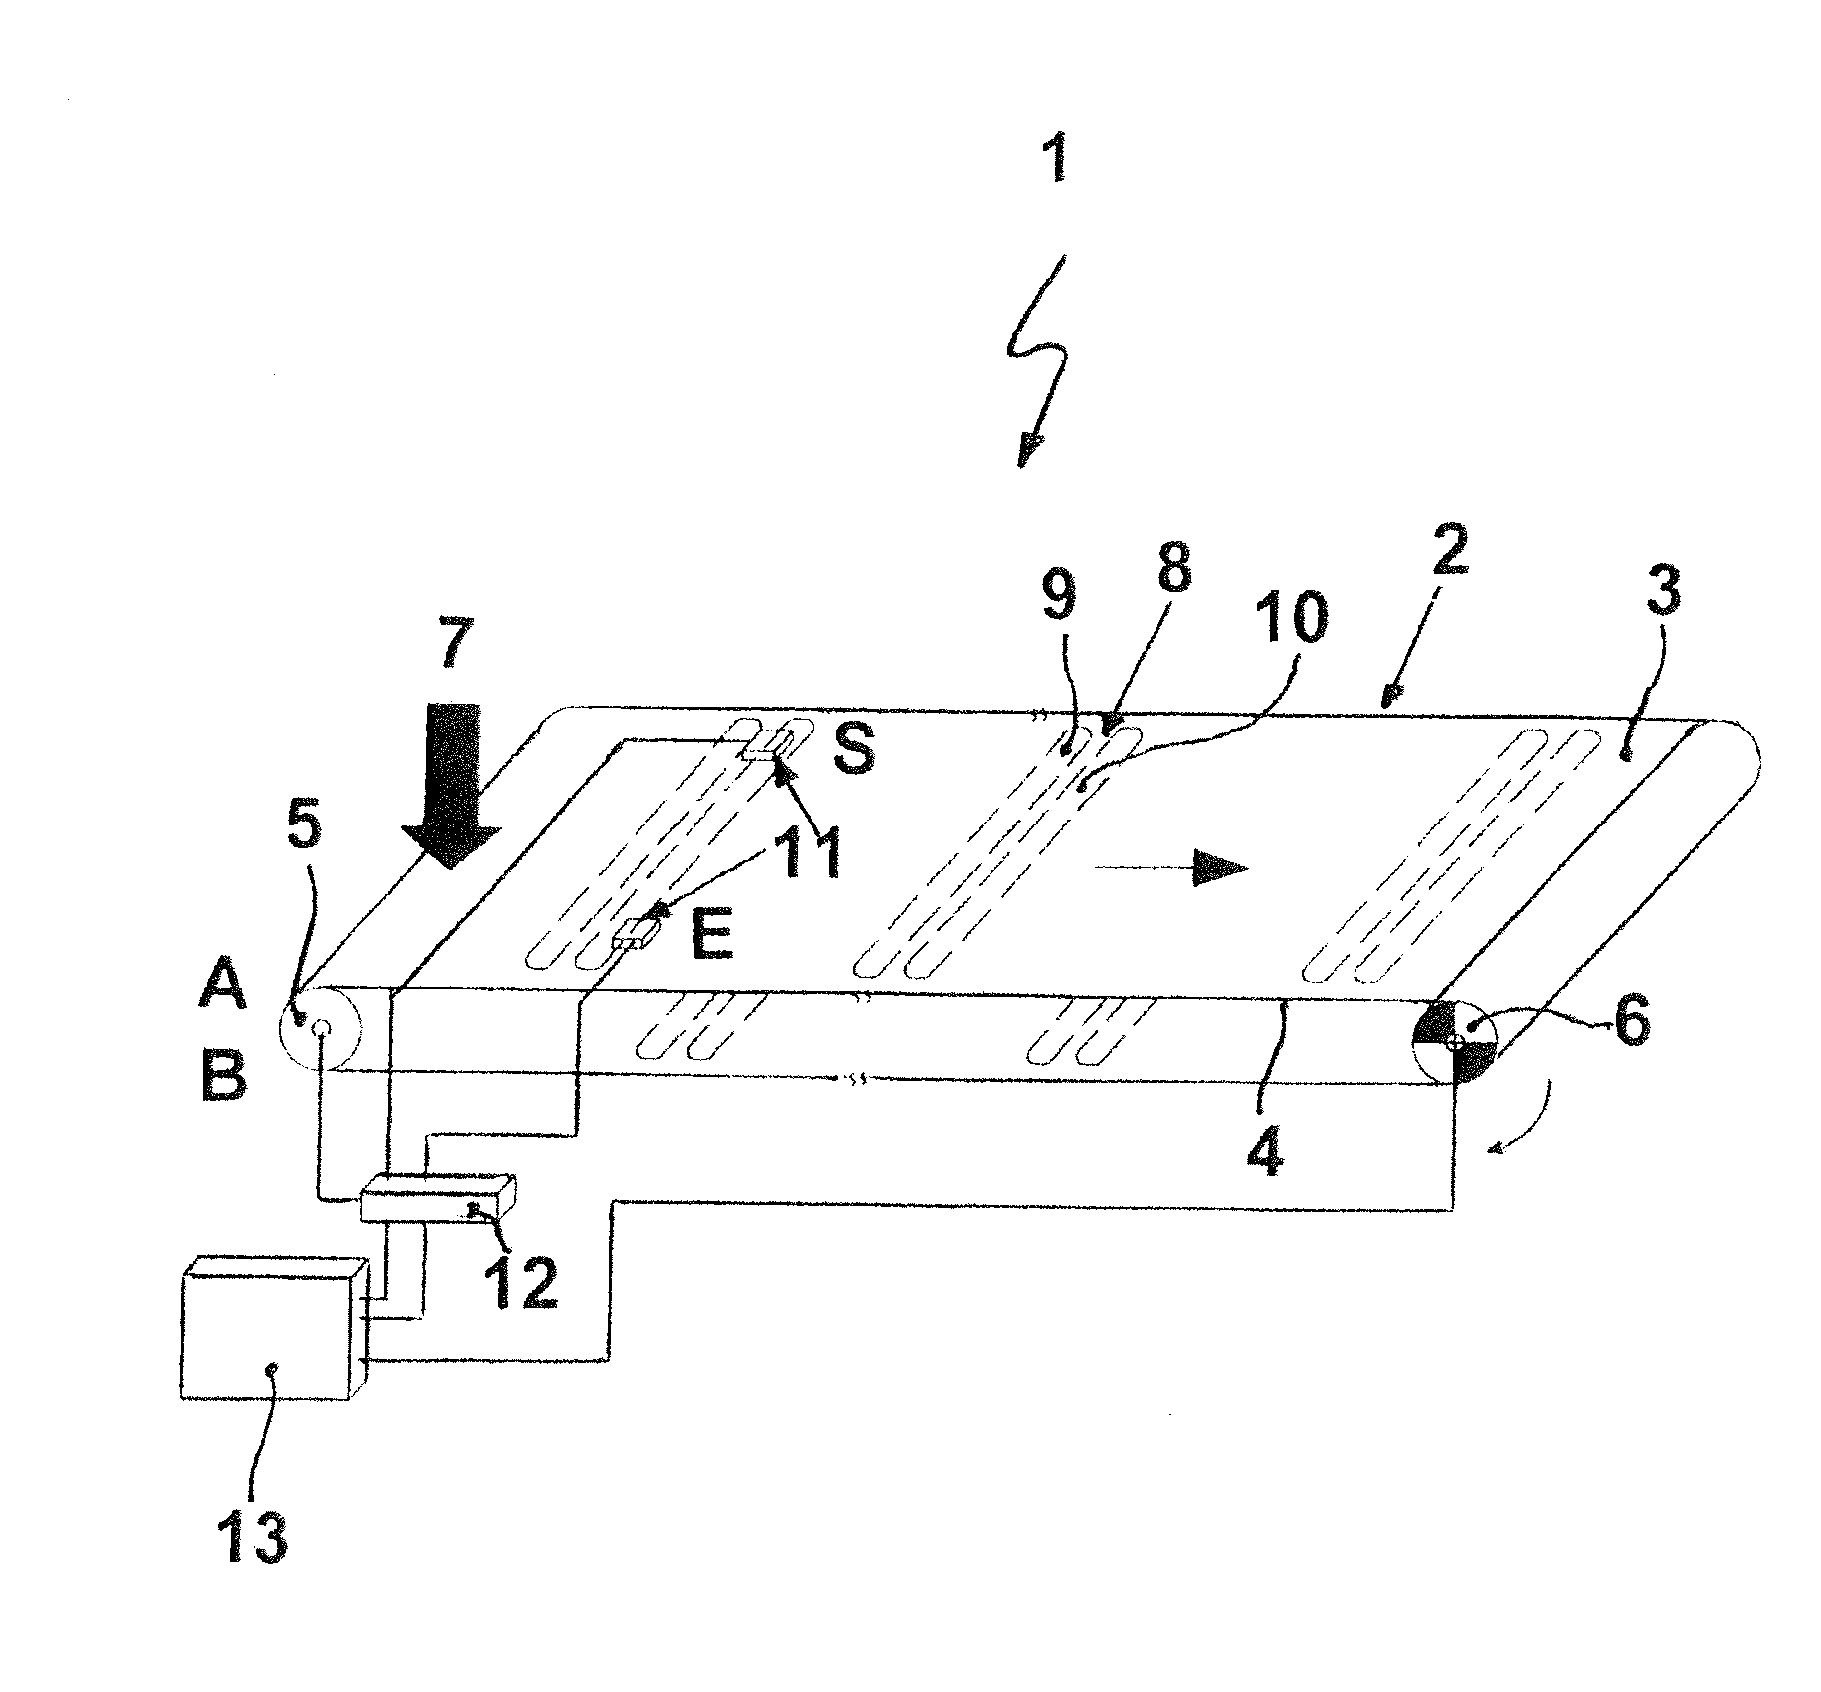 Arrangement for monitoring a conveyor system to detect damage to the conveyor belt thereof